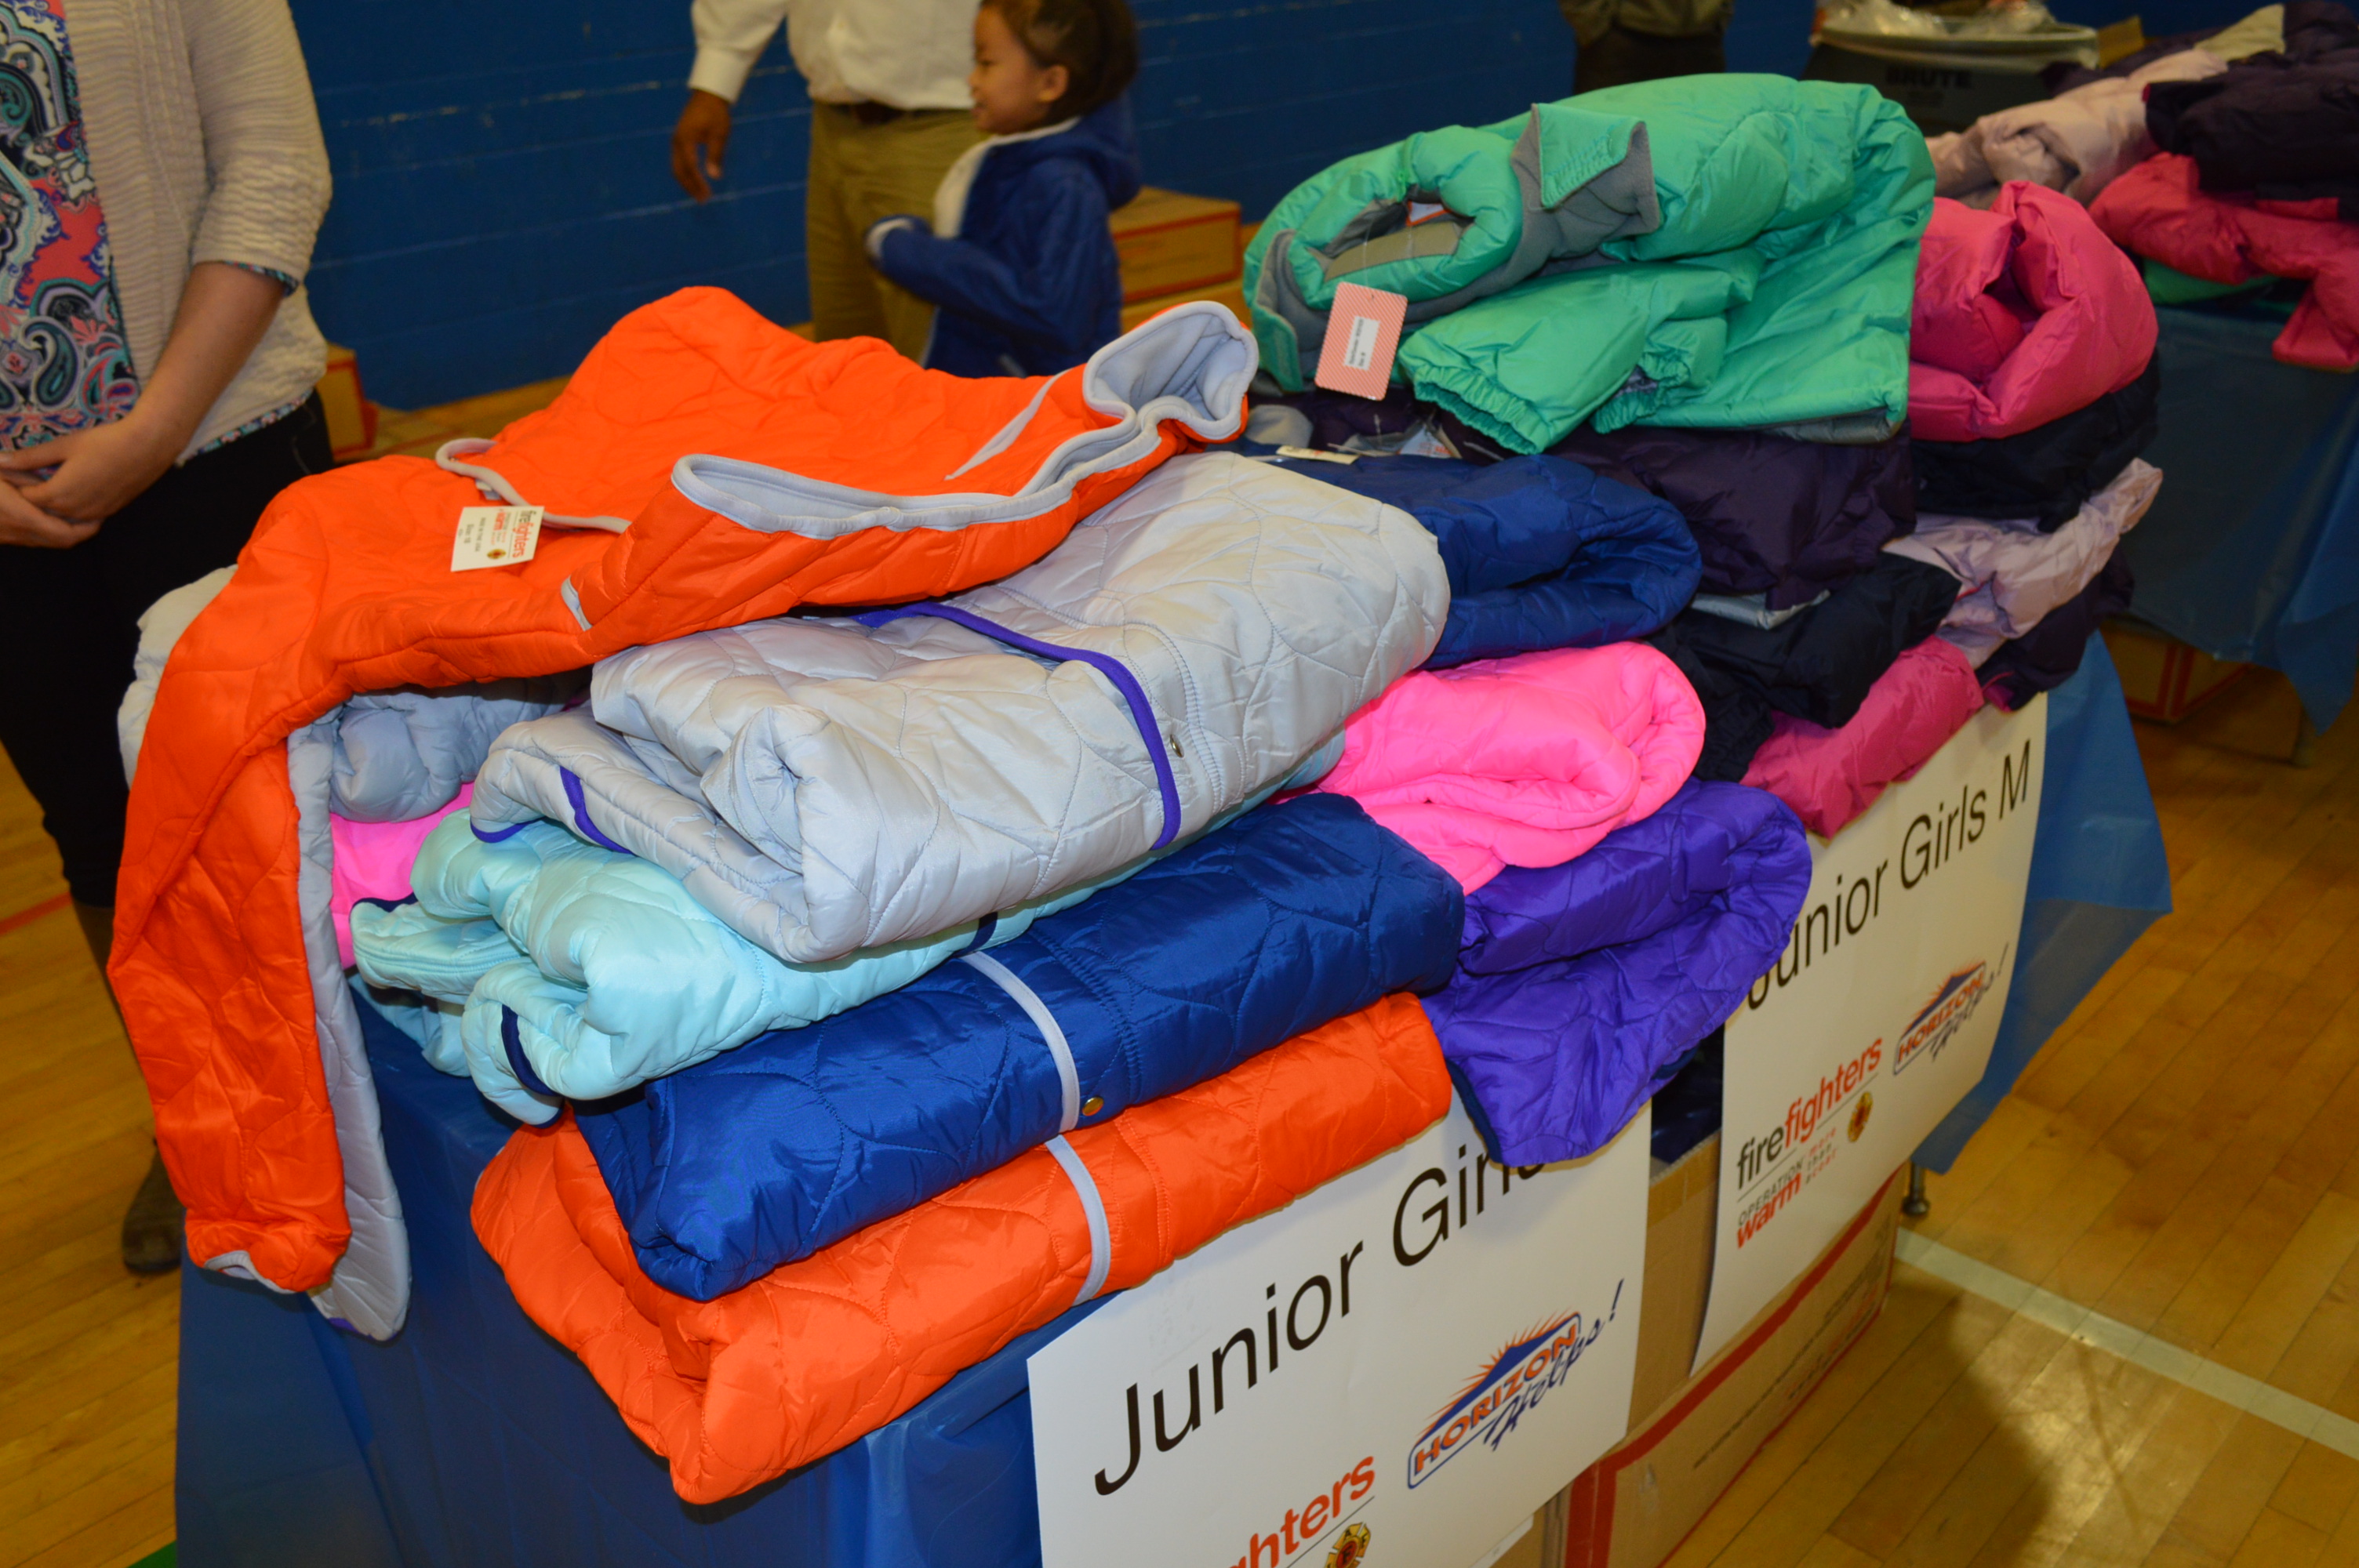 Operation Warm distributed coats to children at Morrell Park Elementary School in Baltimore, Maryland. (Anthony C. Hayes)